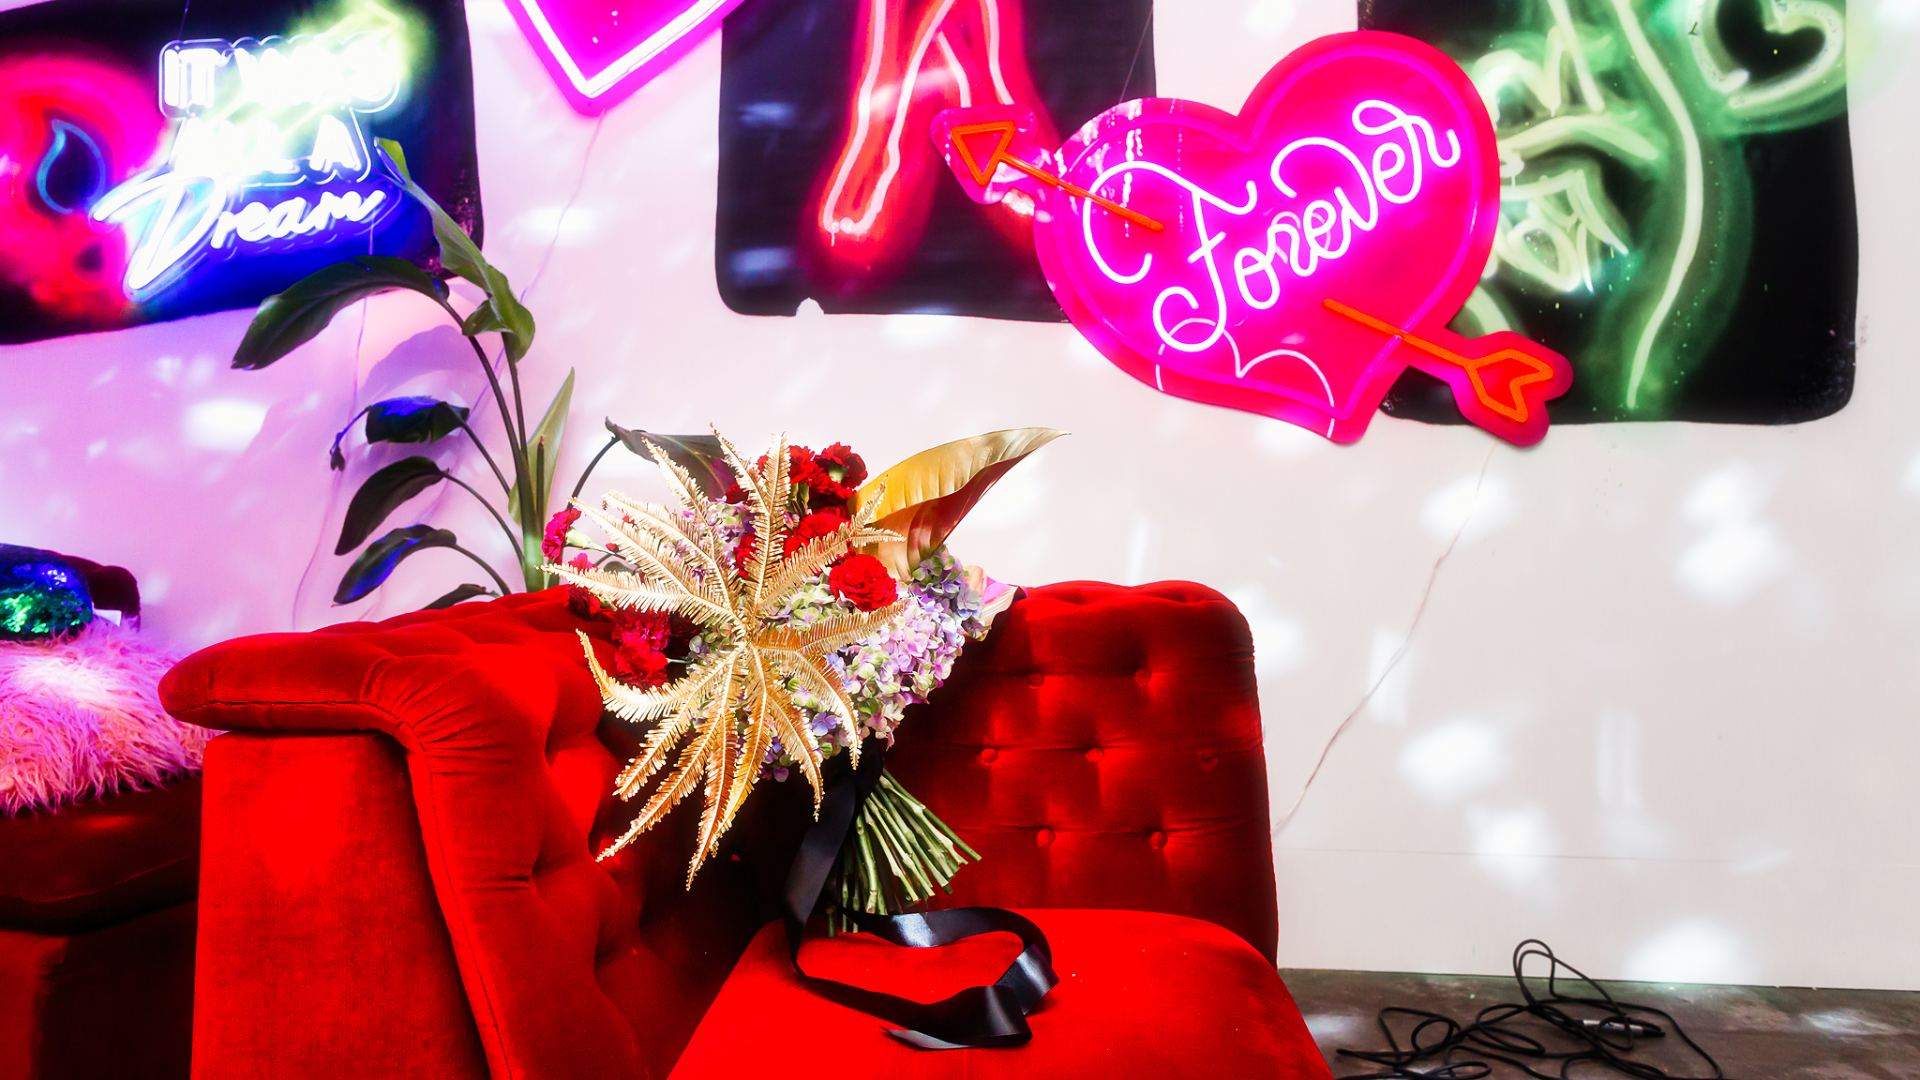 Collingwood Just Scored a Neon-Drenched Chapel for Raucous Vegas-Style Weddings